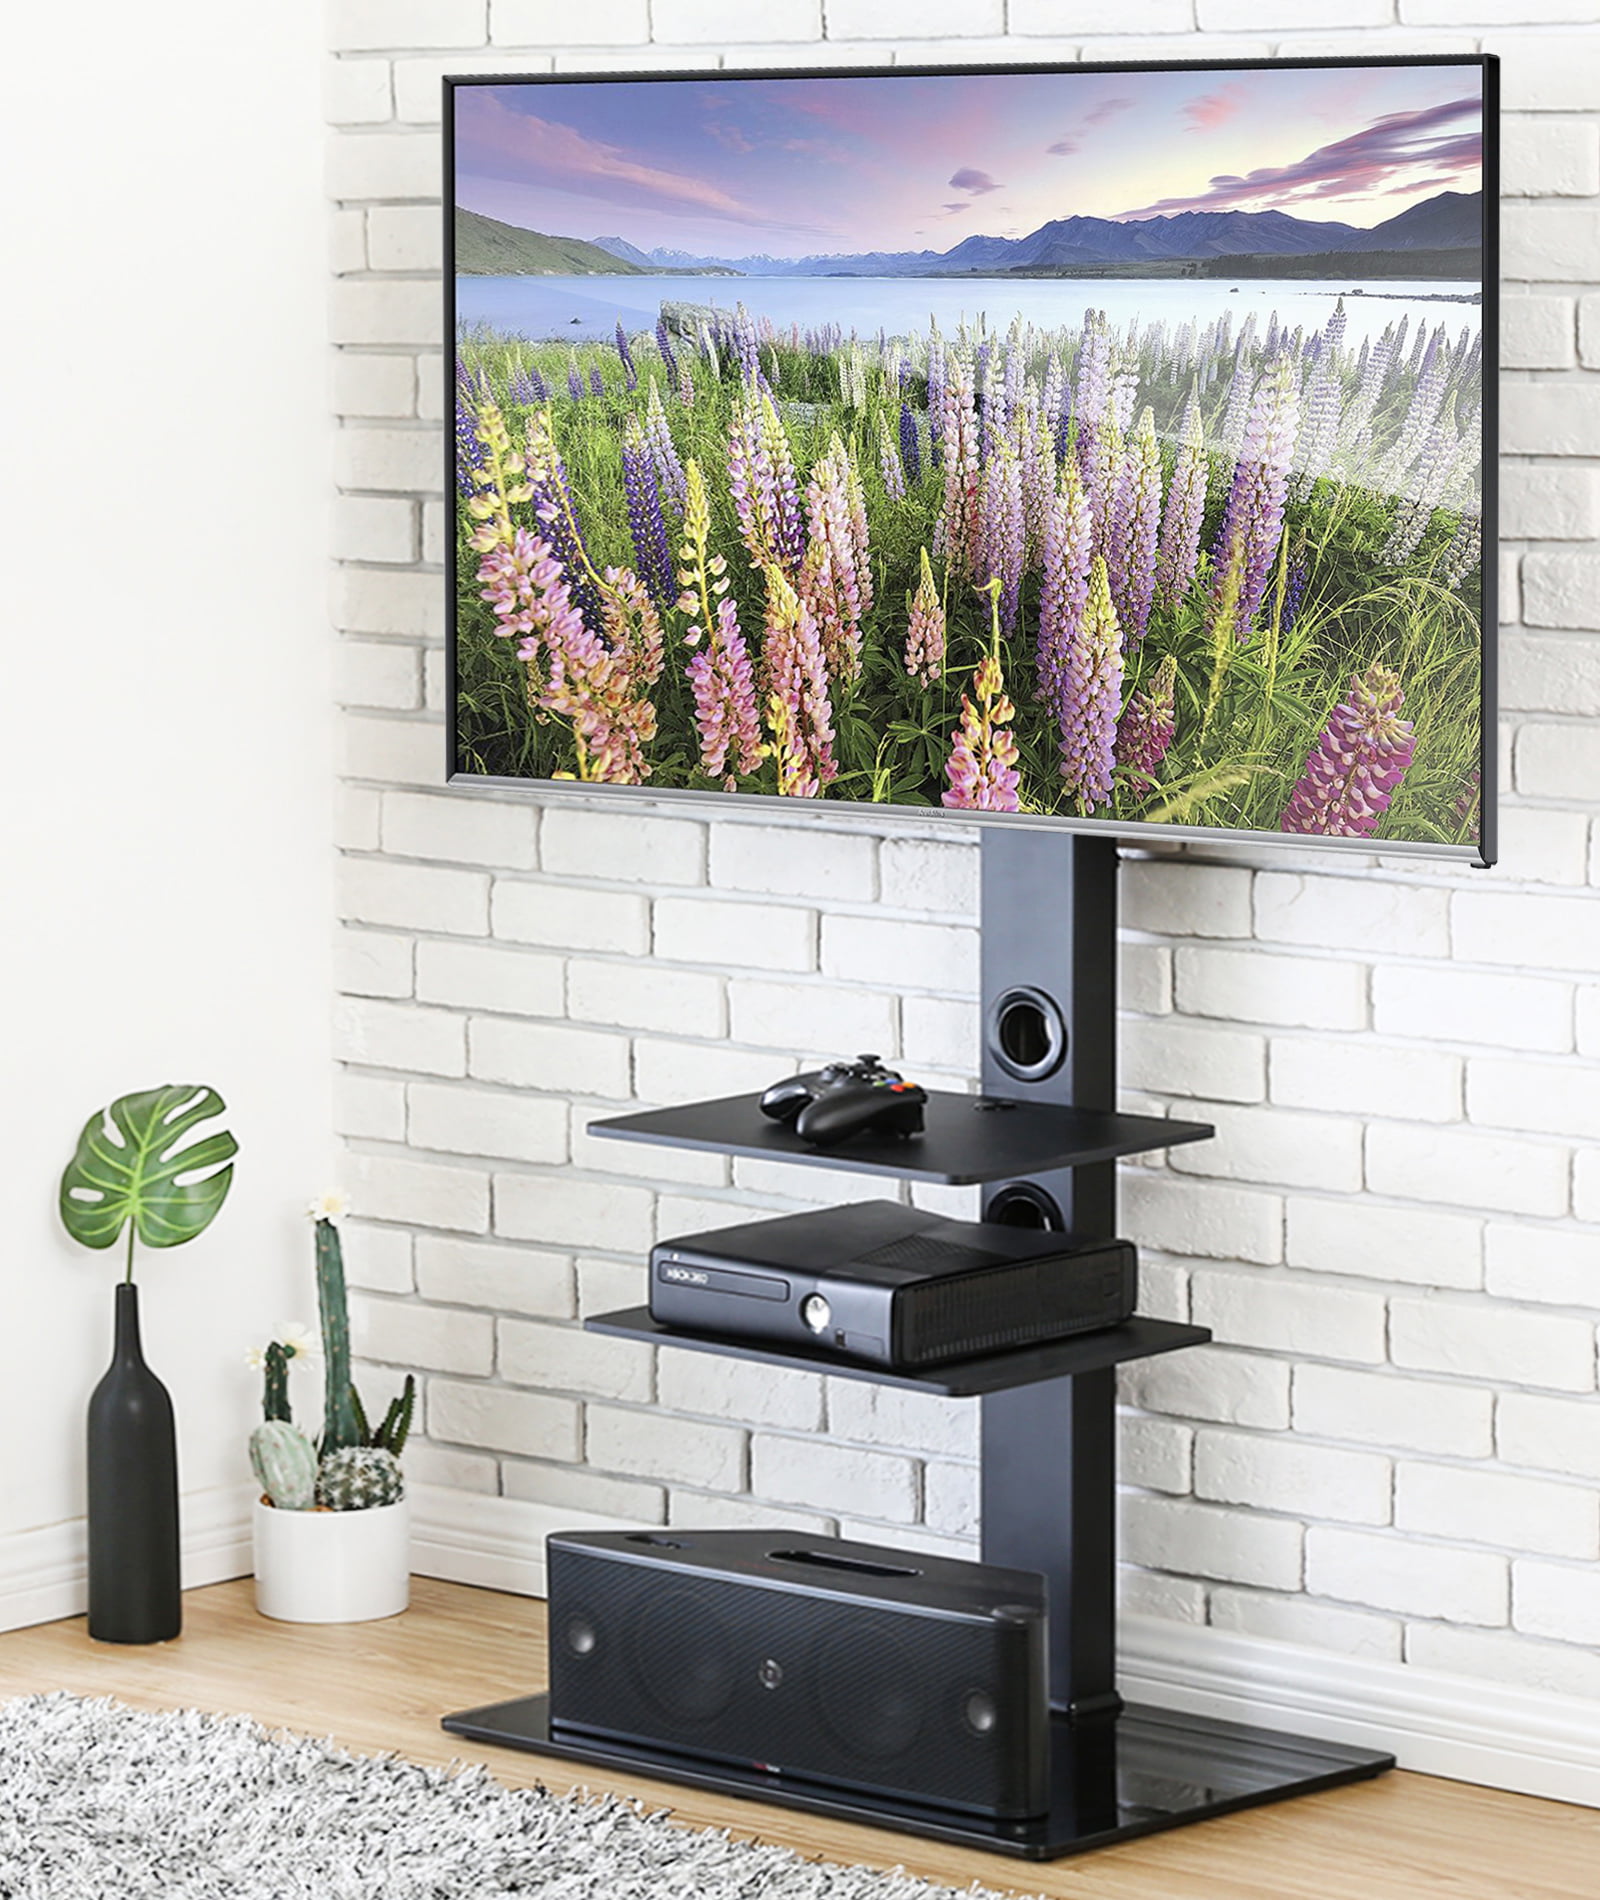 3-in-1 Flat Panel TV Stand for TVs up to 65" Charcoal Easy assembly cable manage 